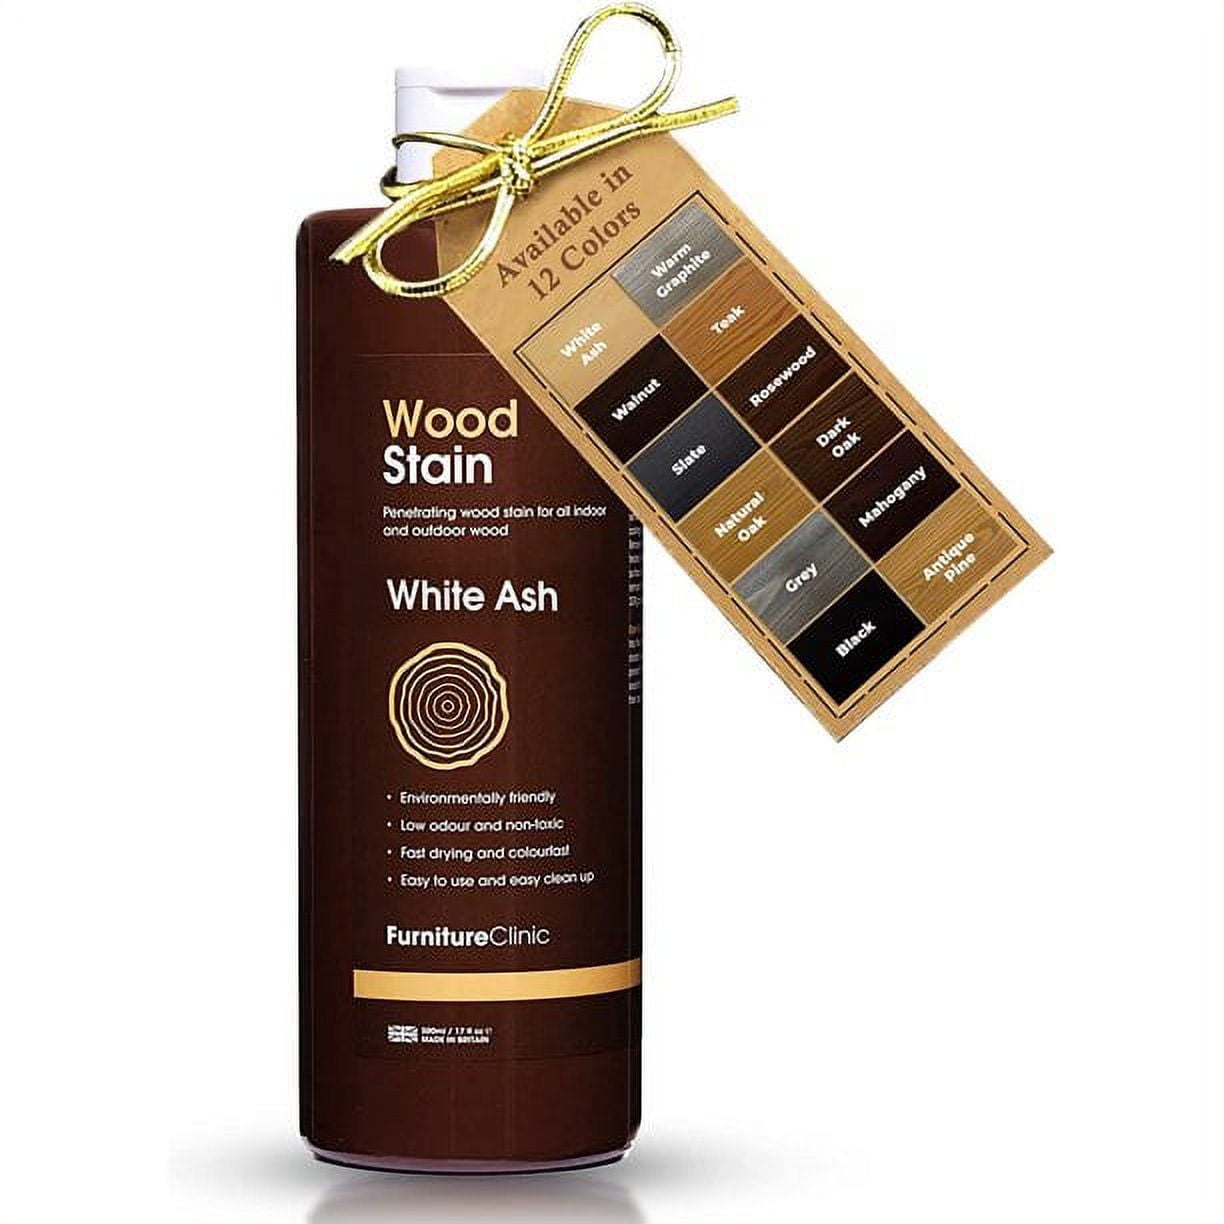 Littlefair's Wood Stain - 34oz/1ltr - Indoor Furniture Stain - Light & Dark  Finishes - Special Non Toxic & Eco Friendly Formula - Easy Clean Wood